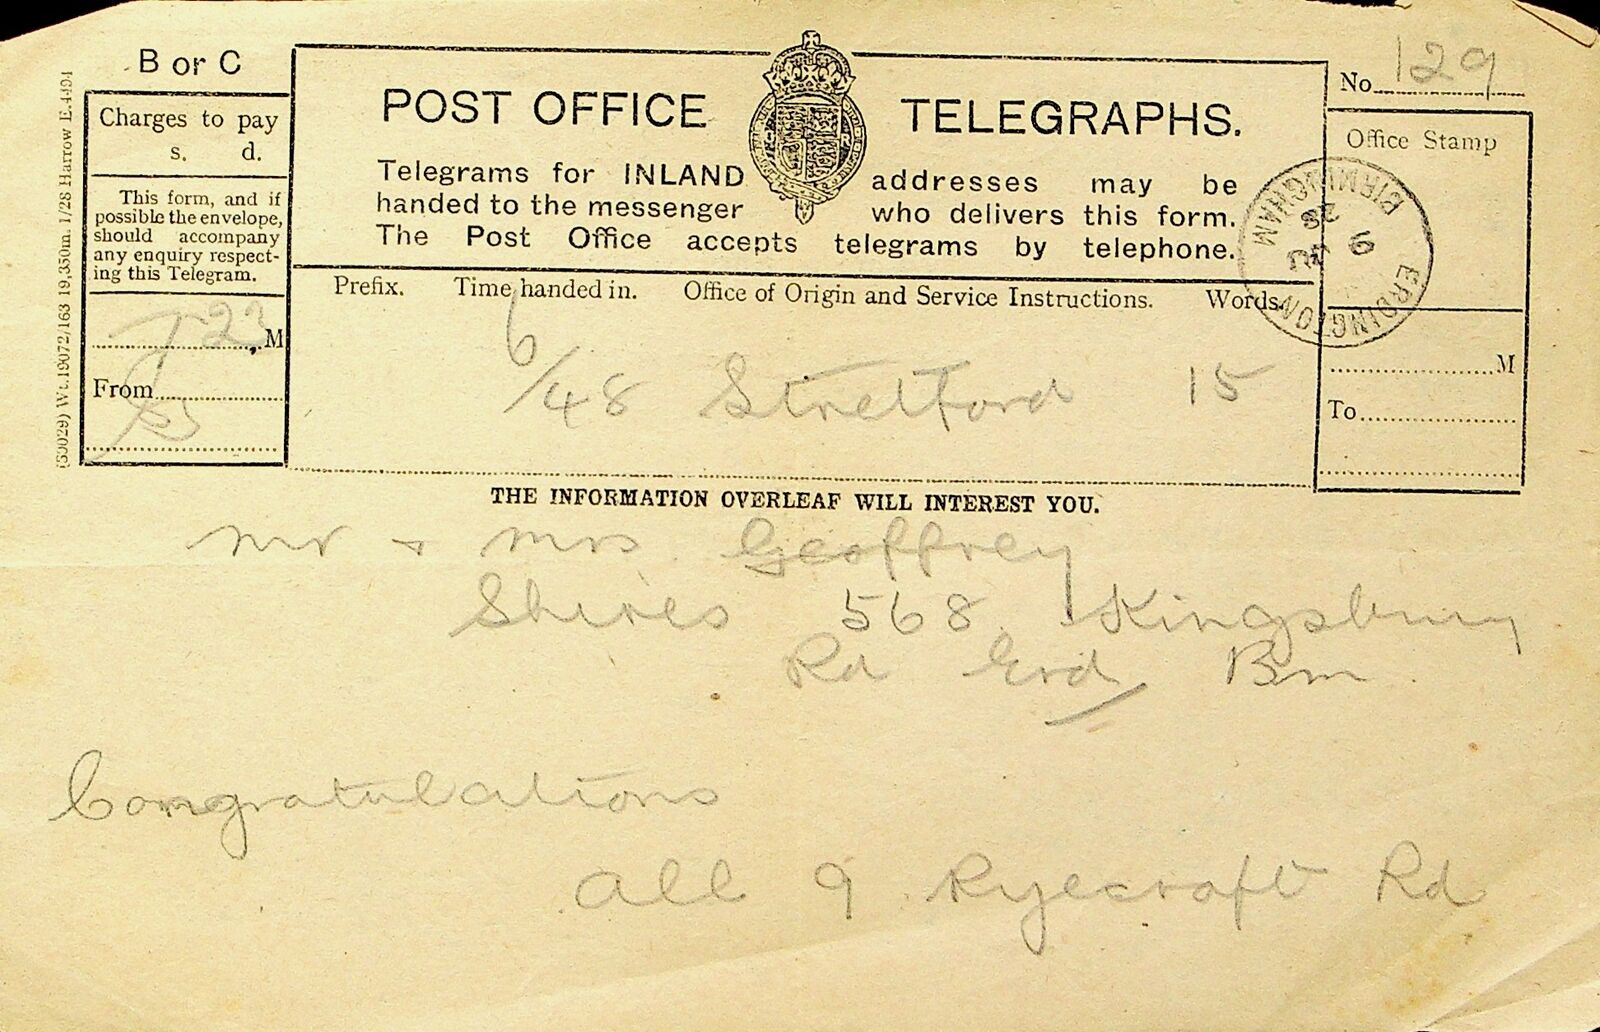 PO Telegraph Form of 9-6-1938 - front